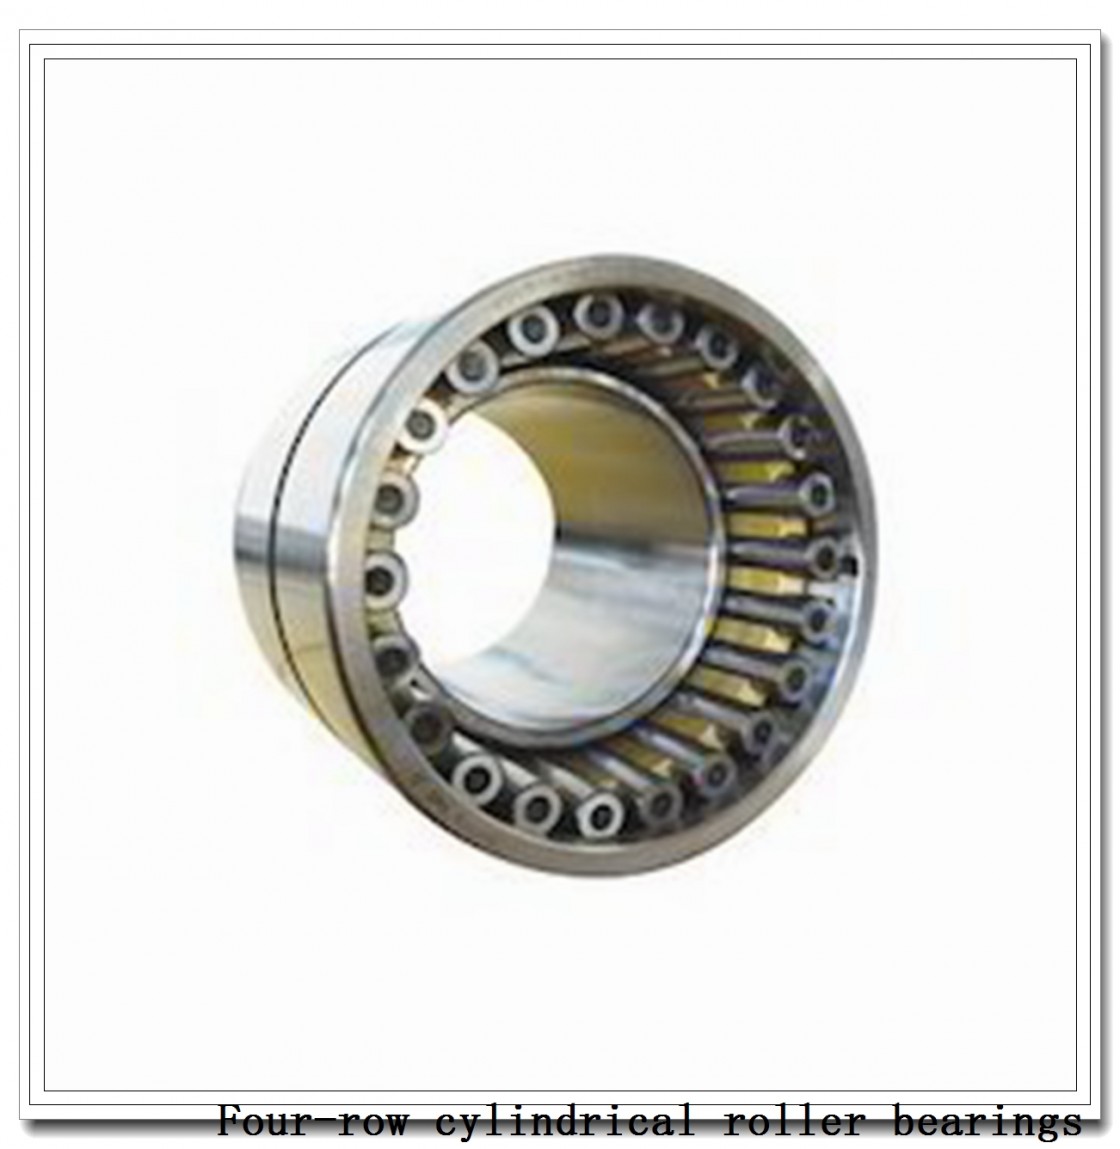 600ARXS2744 672RXS2744 Four-Row Cylindrical Roller Bearings